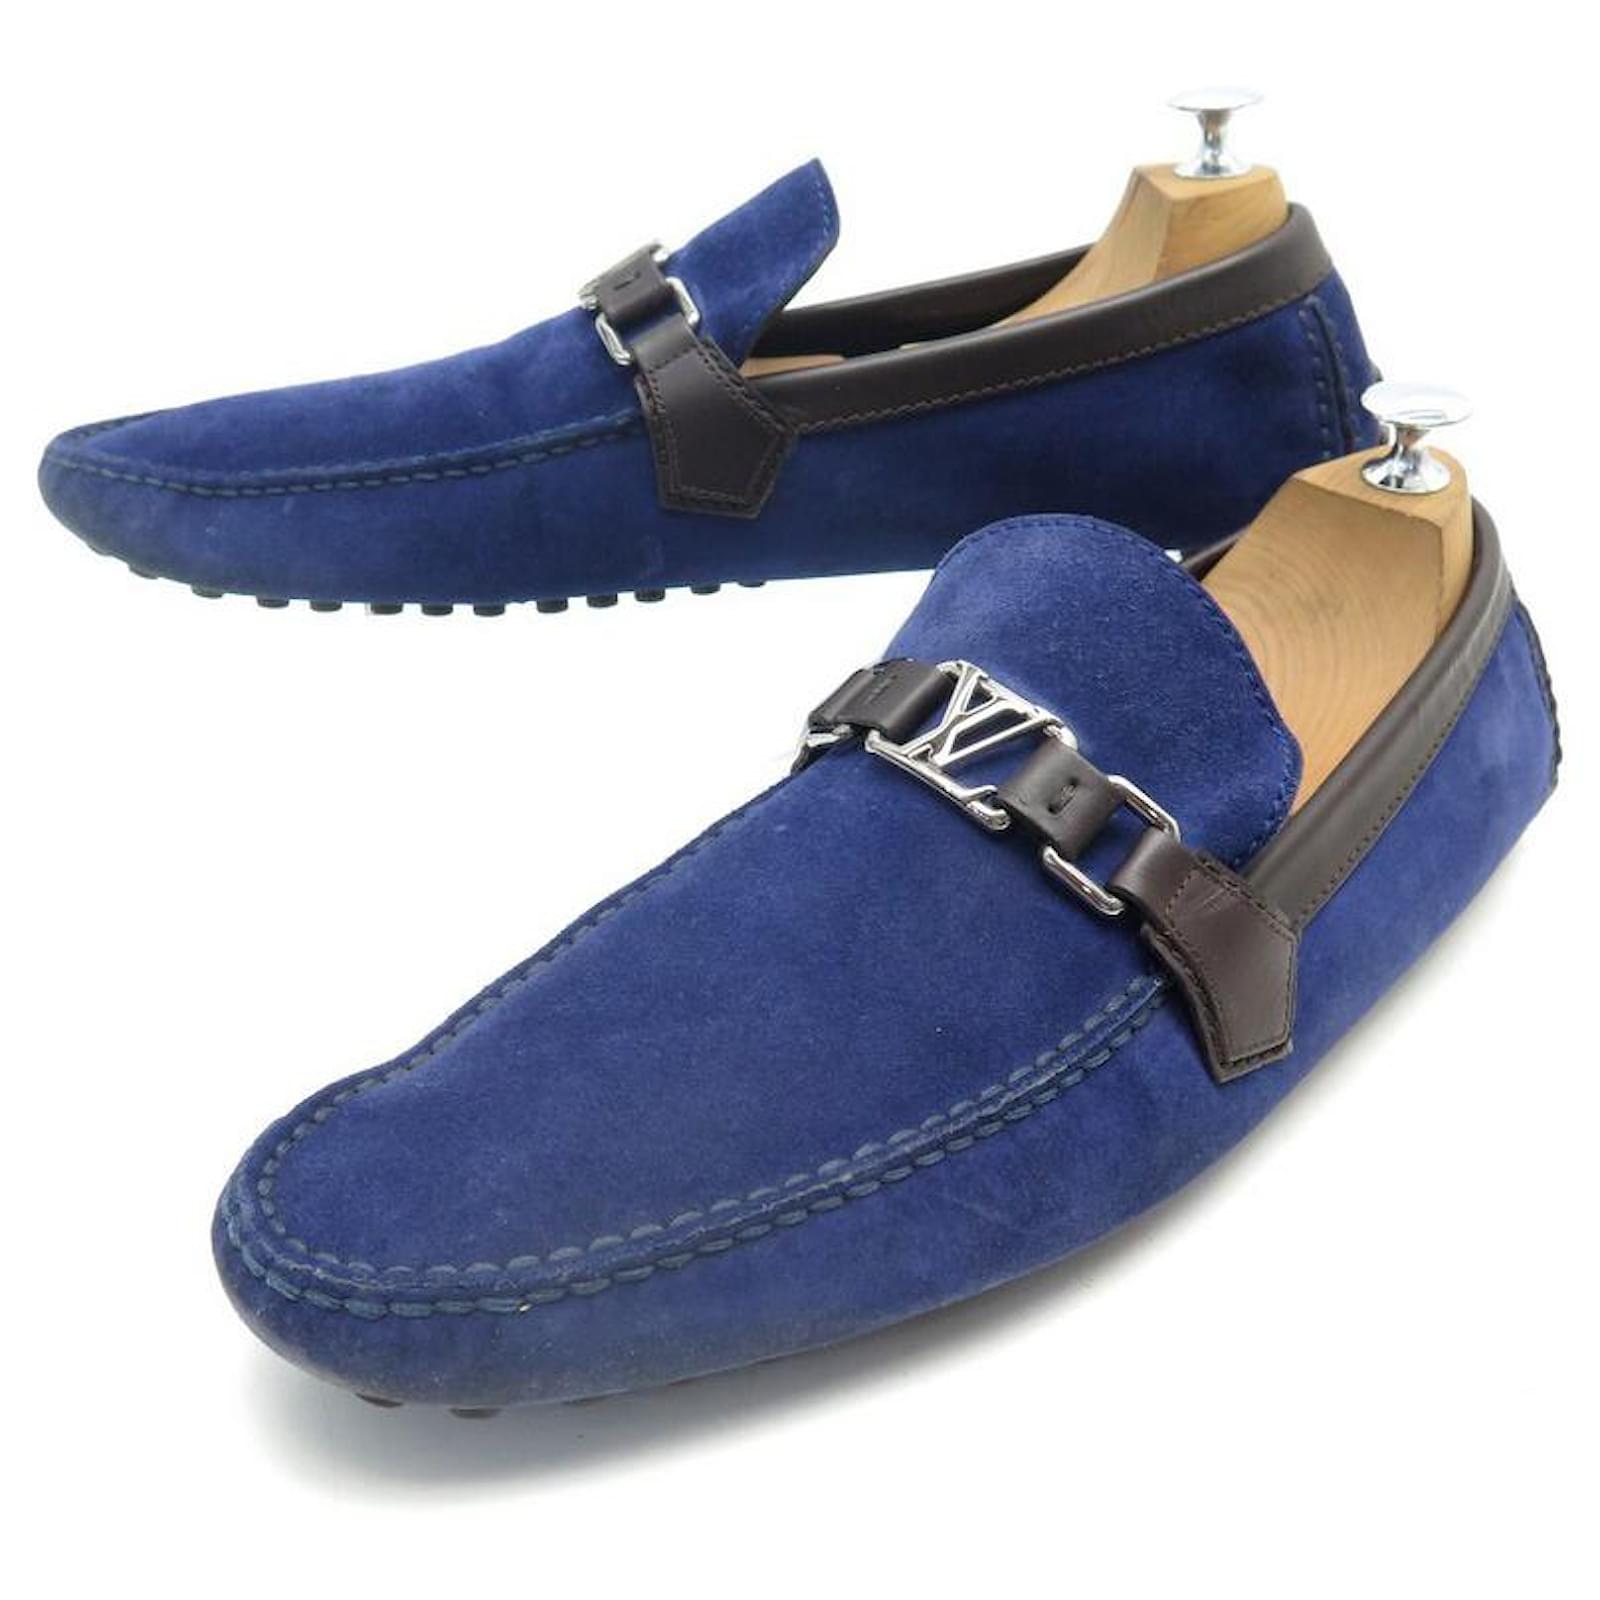 Louis Vuitton Shoe Navy Suede Loafer / Driving Shoe 38.5 / 8.5 – Mightychic